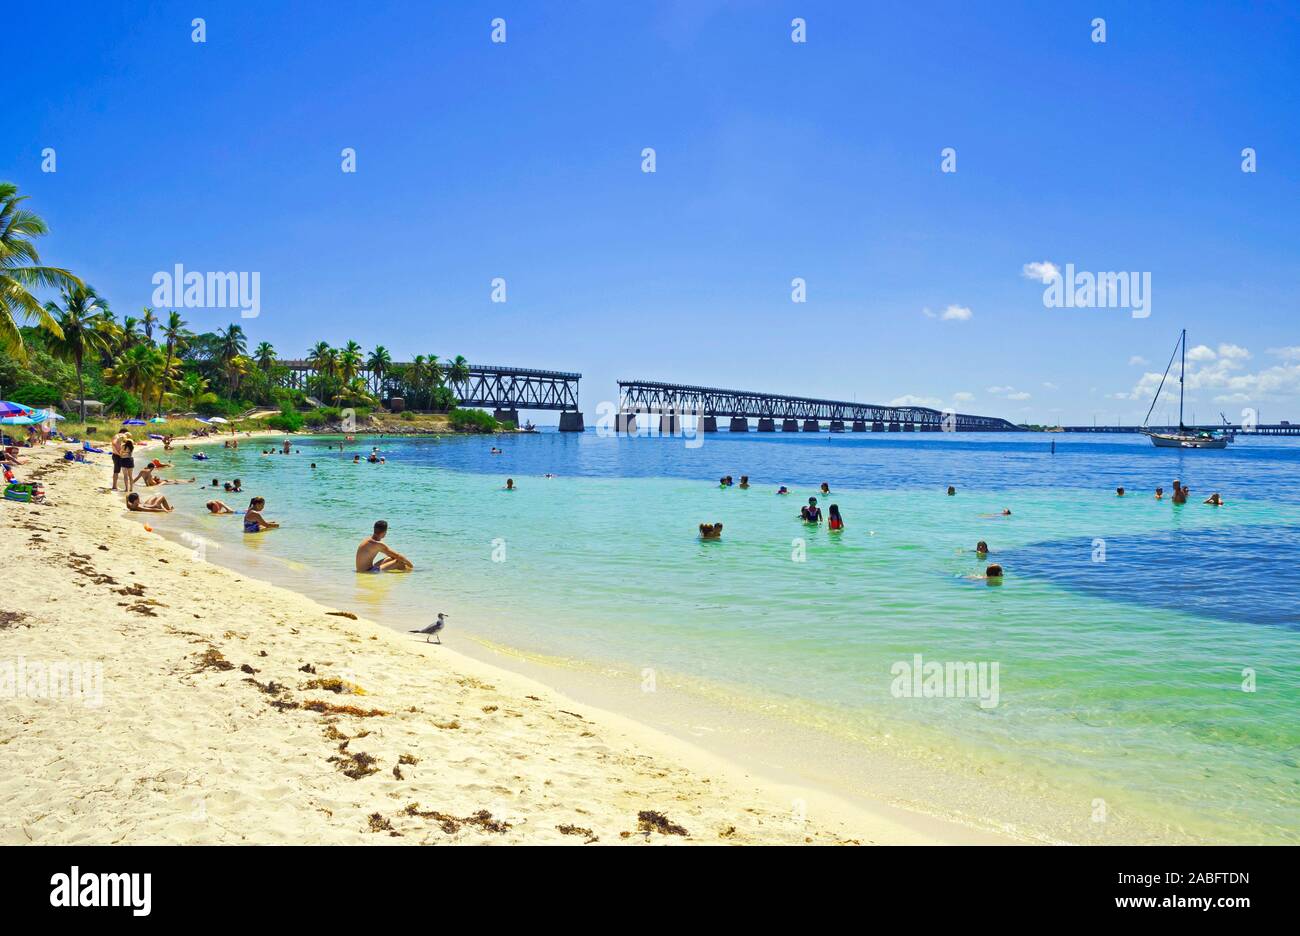 People relaxing on the beach of the Bahia Honda State Park, the Florida Keys Stock Photo